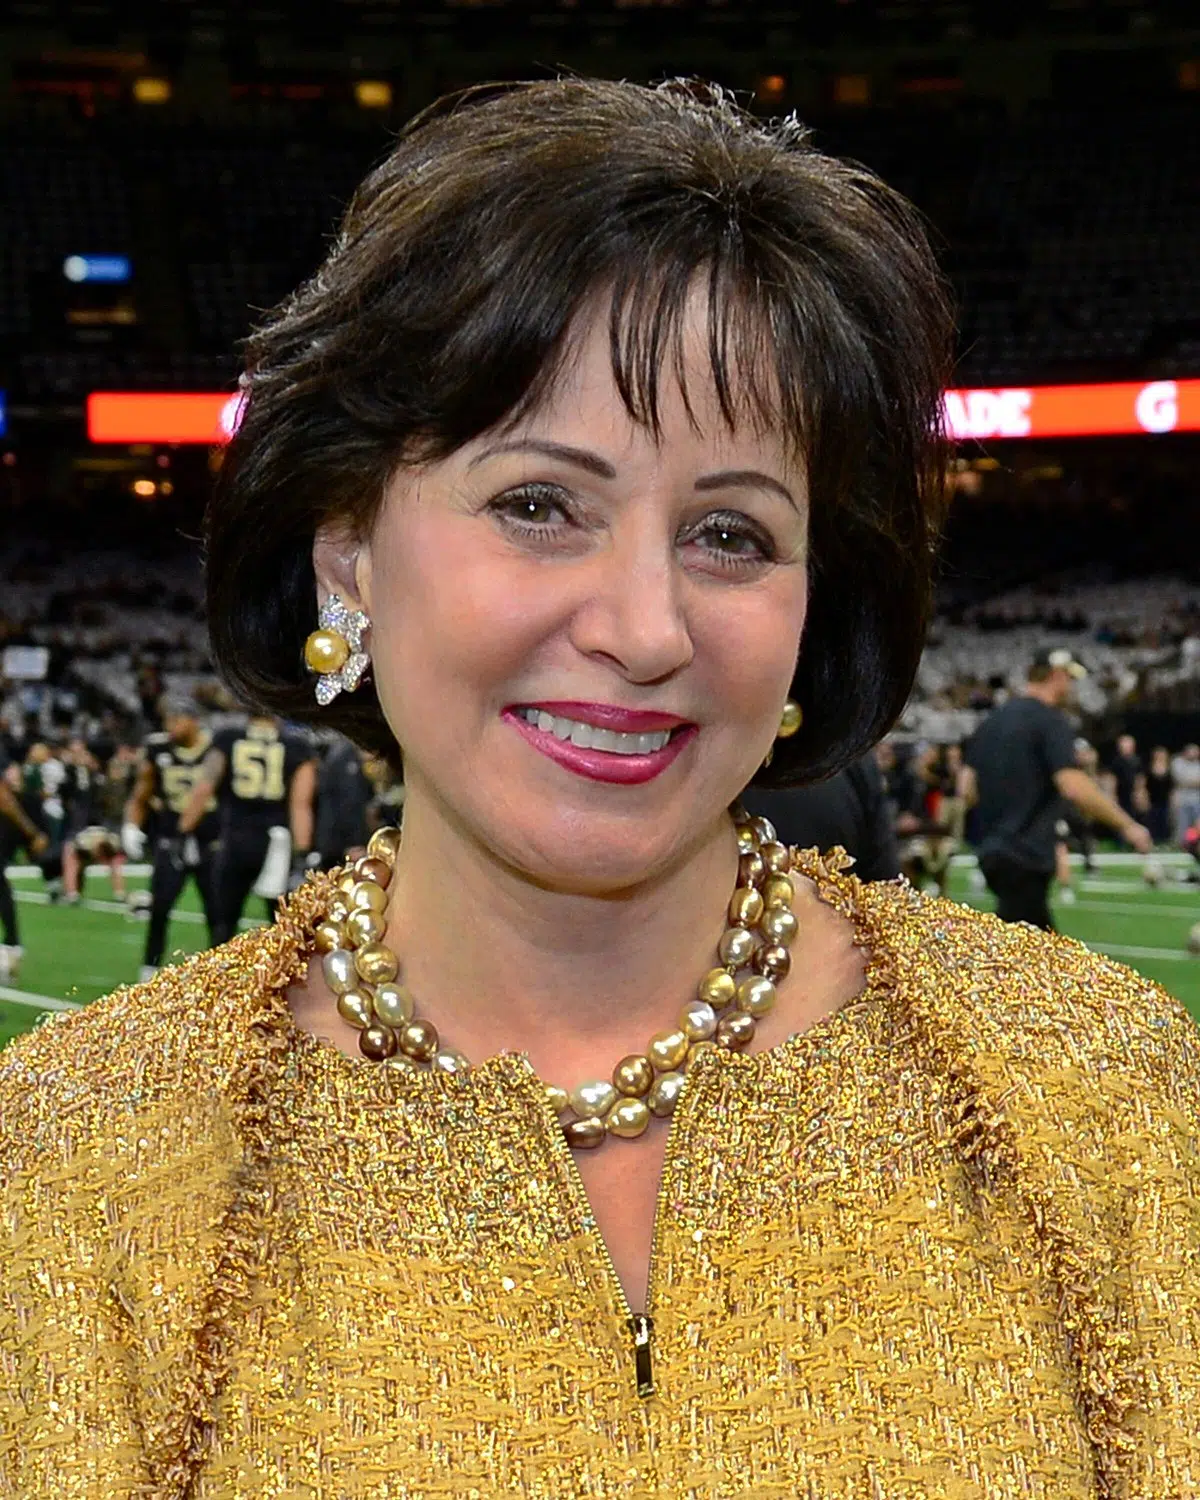 Gayle Benson celebrates charitable efforts in New Orleans amidst COVID-19